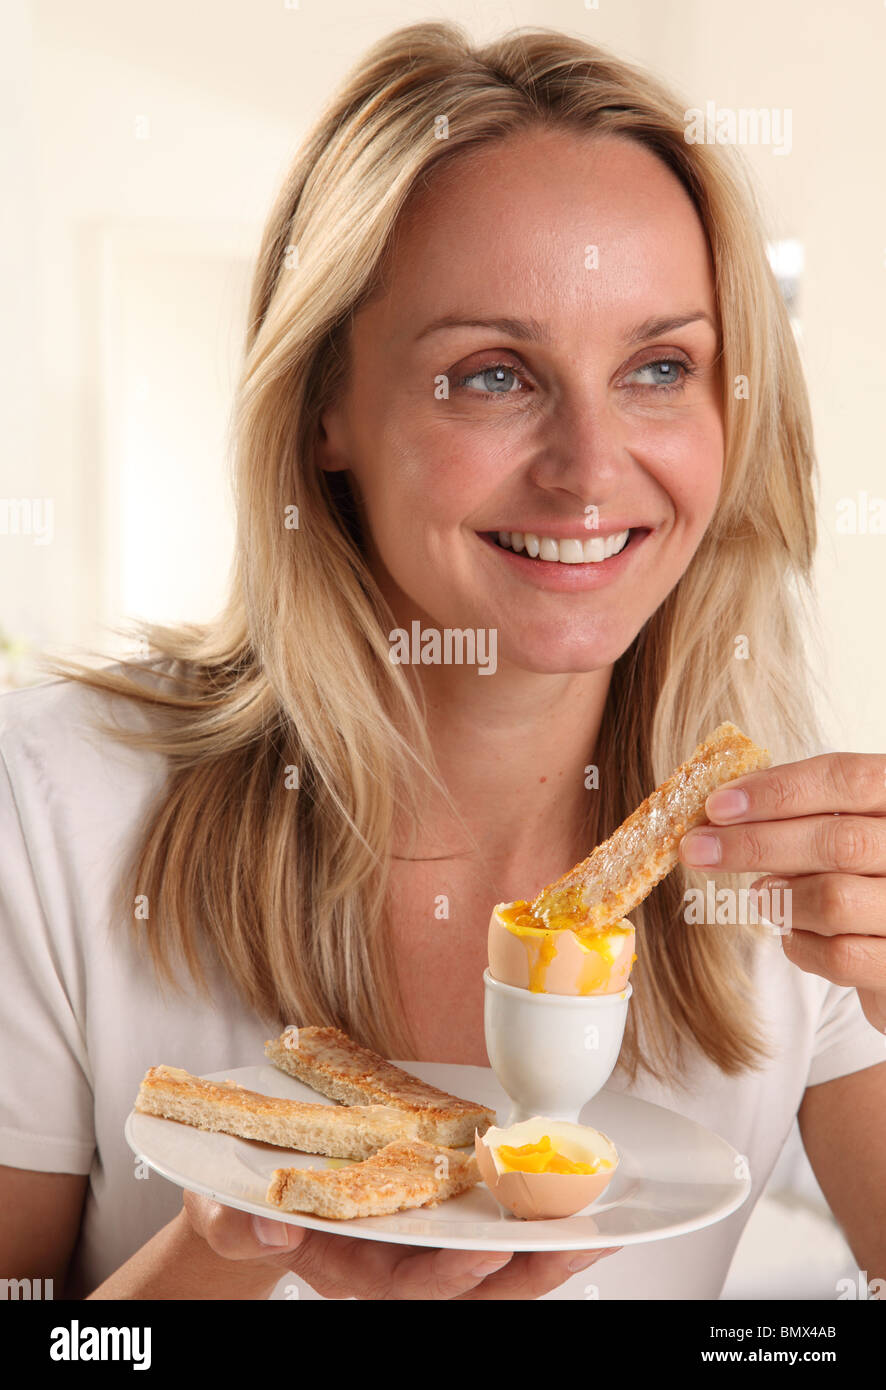 WOMAN EATING A BOILED EGG Stock Photo